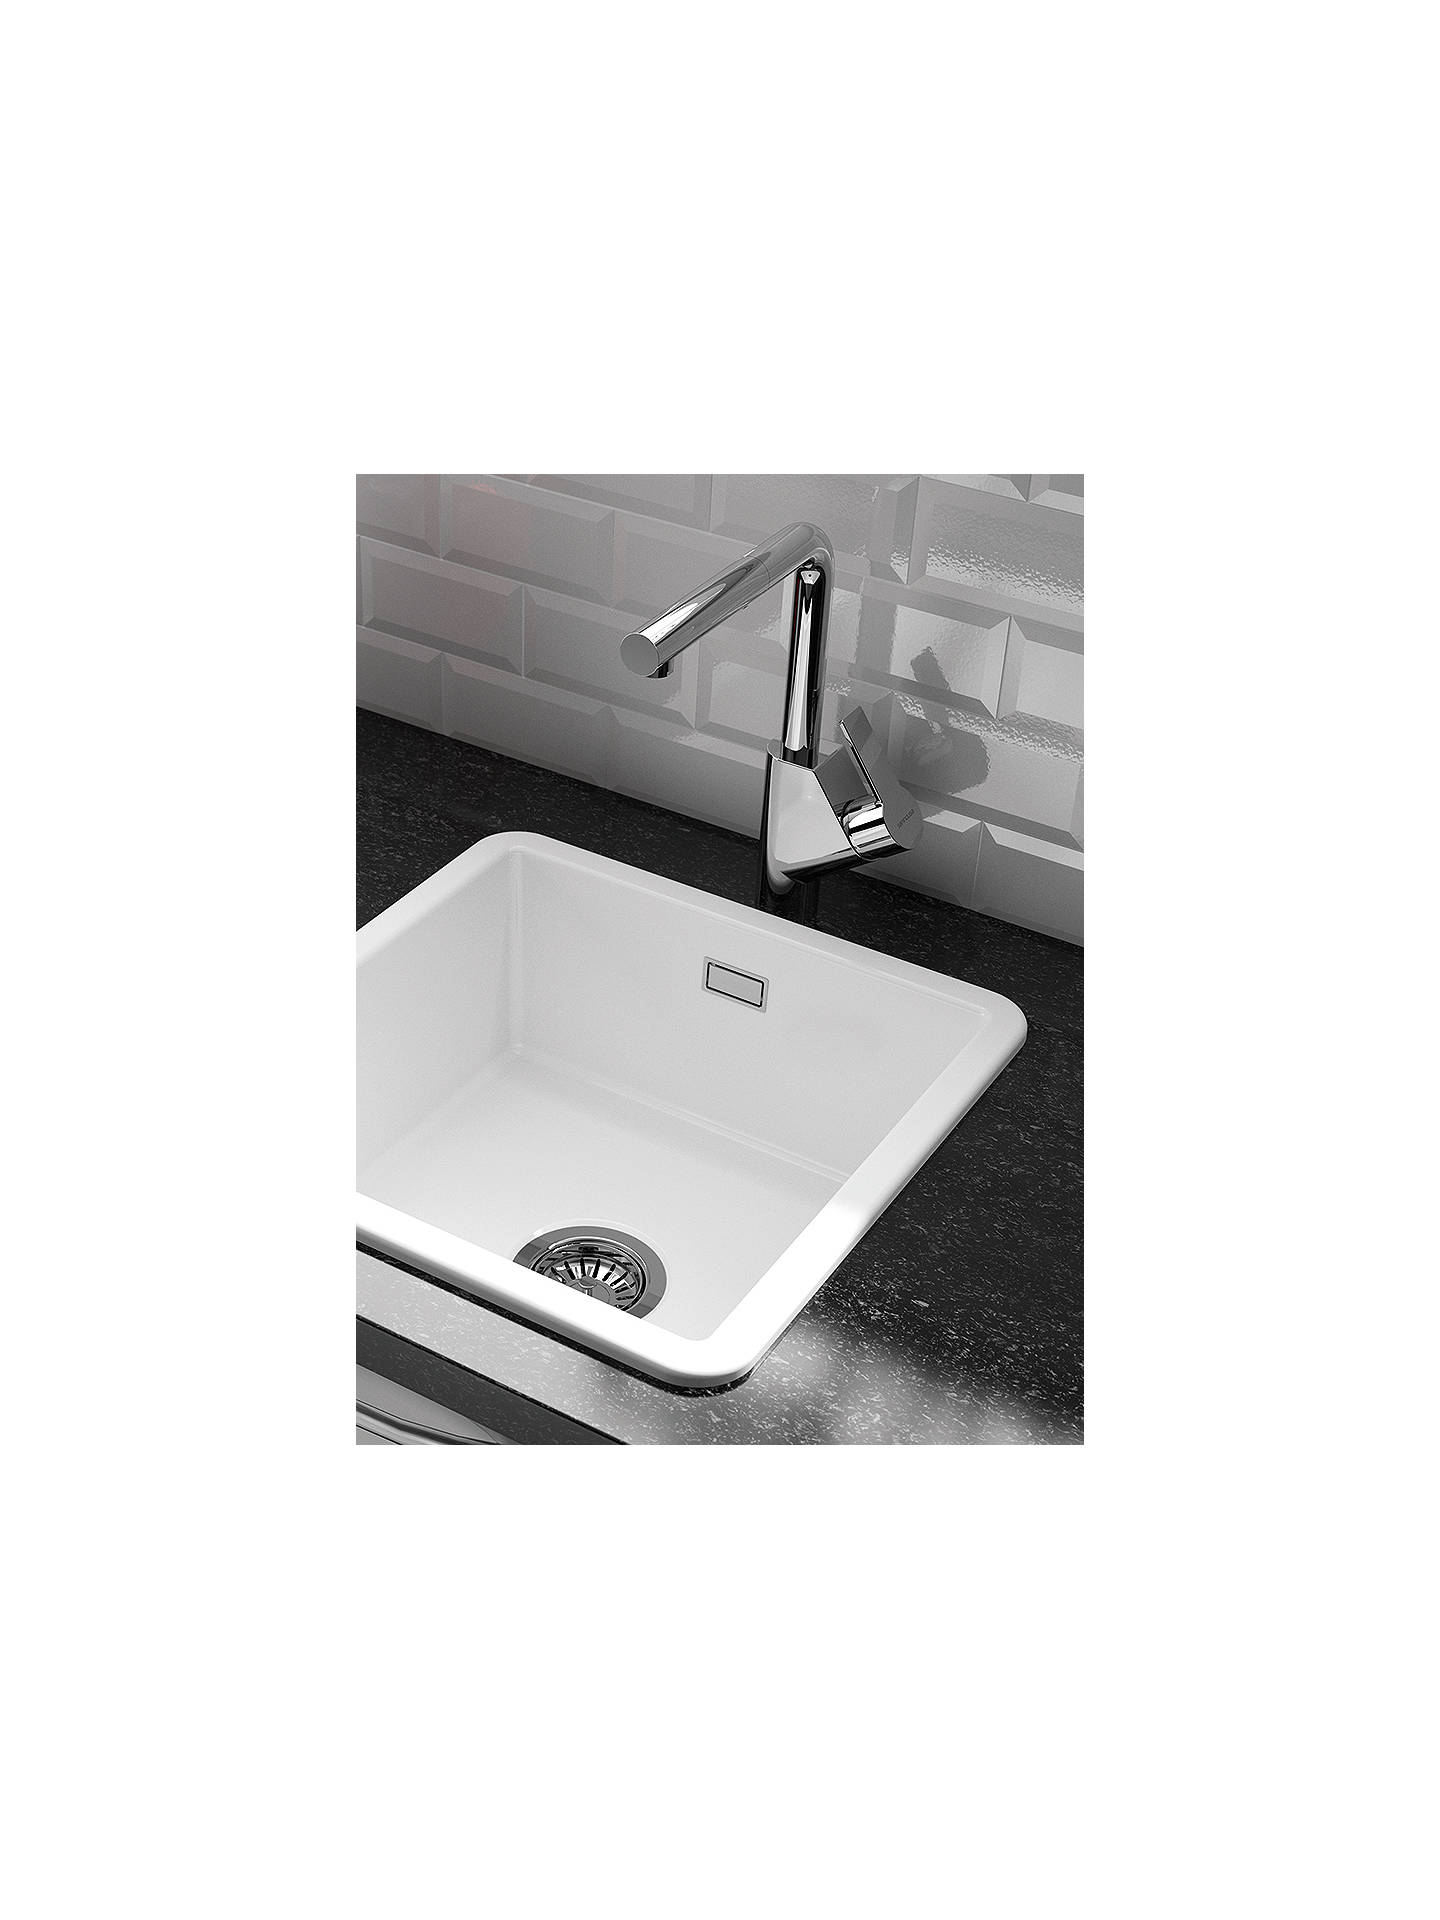 Clearwater Metro Small Single Bowl Ceramic Kitchen Sink White At